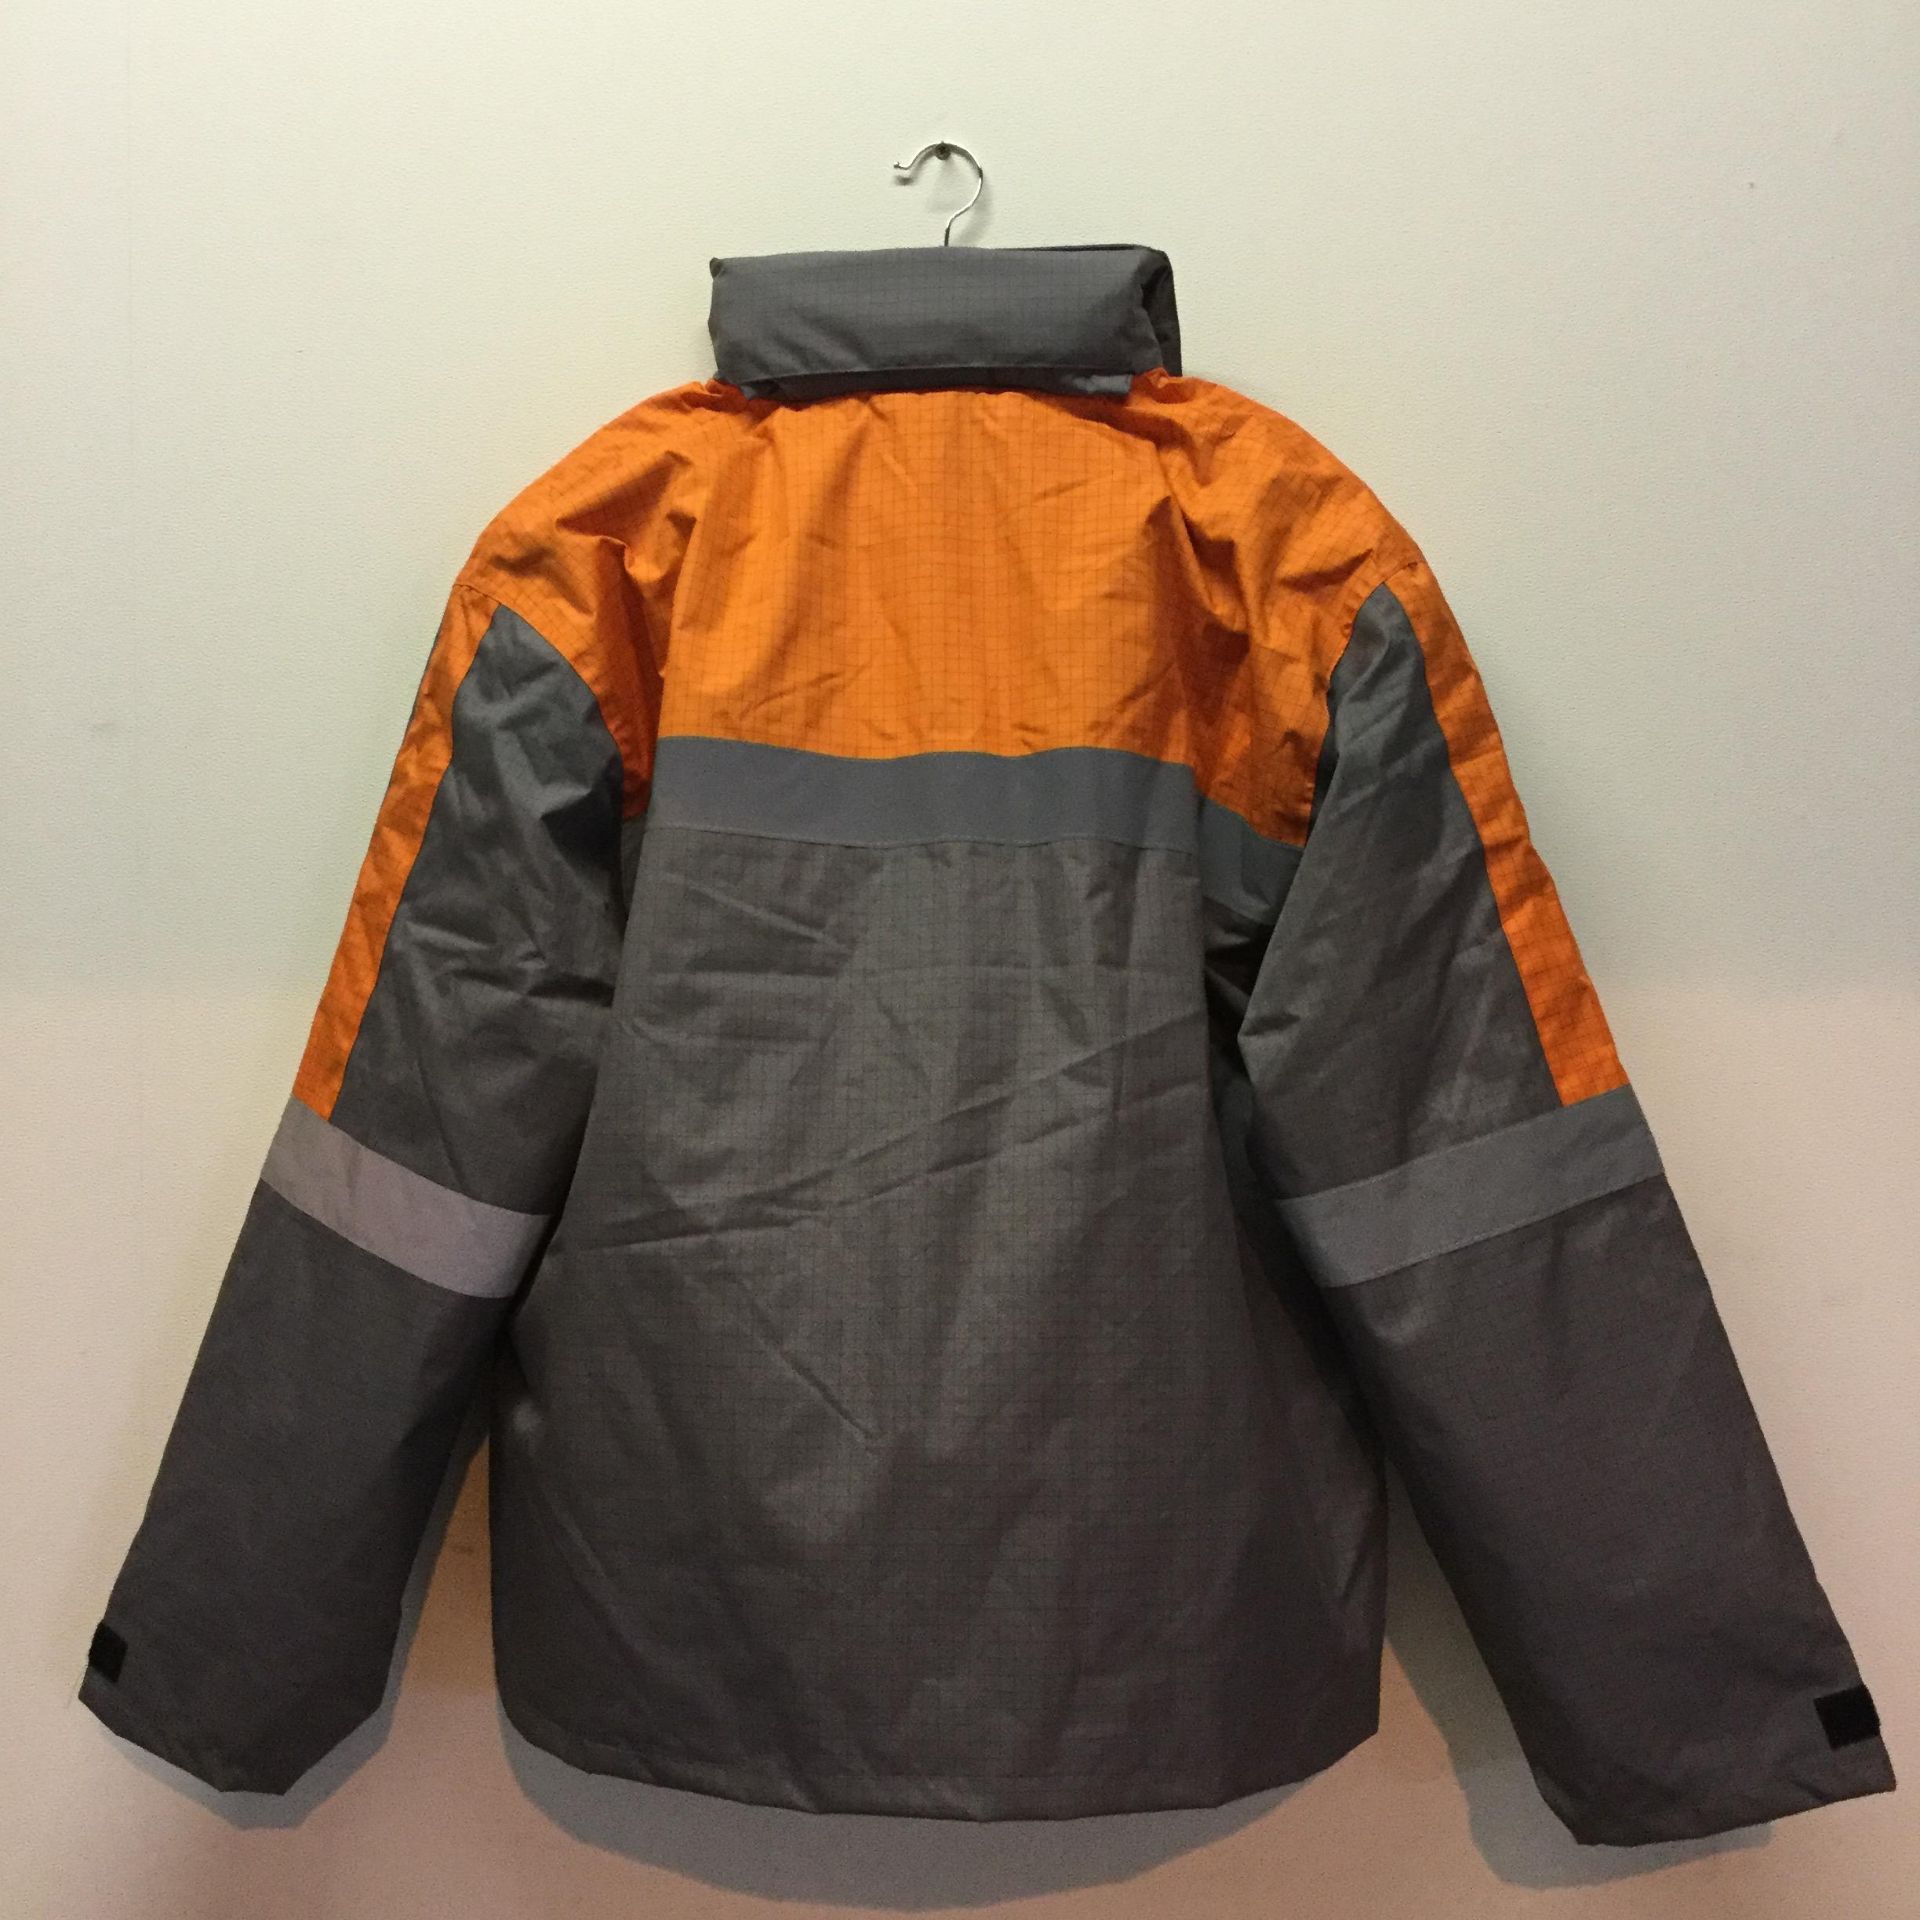 All Weather 3 layer Gortex Antistatic waterproof Jackets - Size 52 - Image 2 of 2